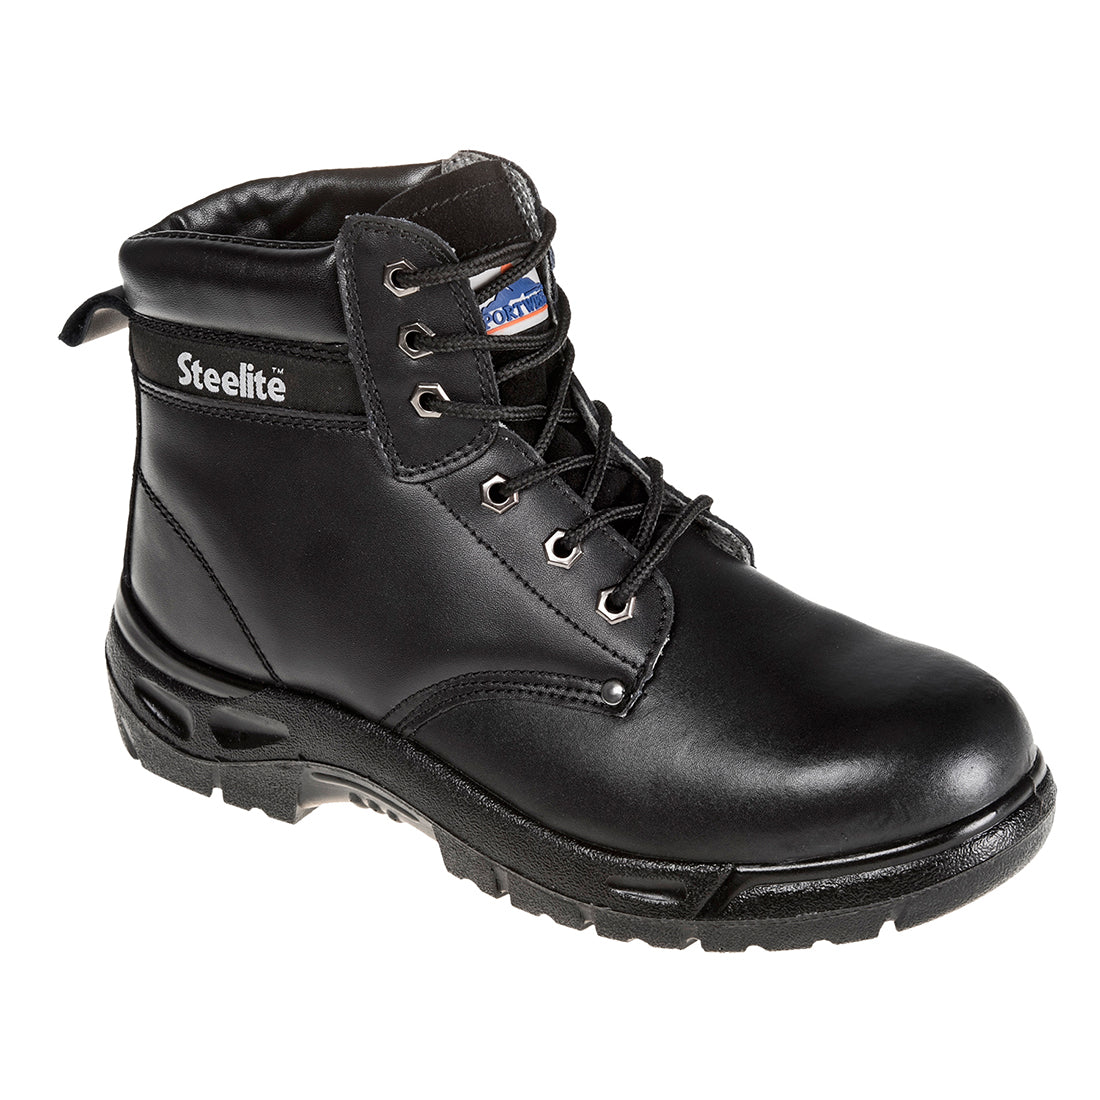 PORTWEST SIZE 6 / 39 FW03 Black Steelite Boot S3 Steel toe safety boot rigger